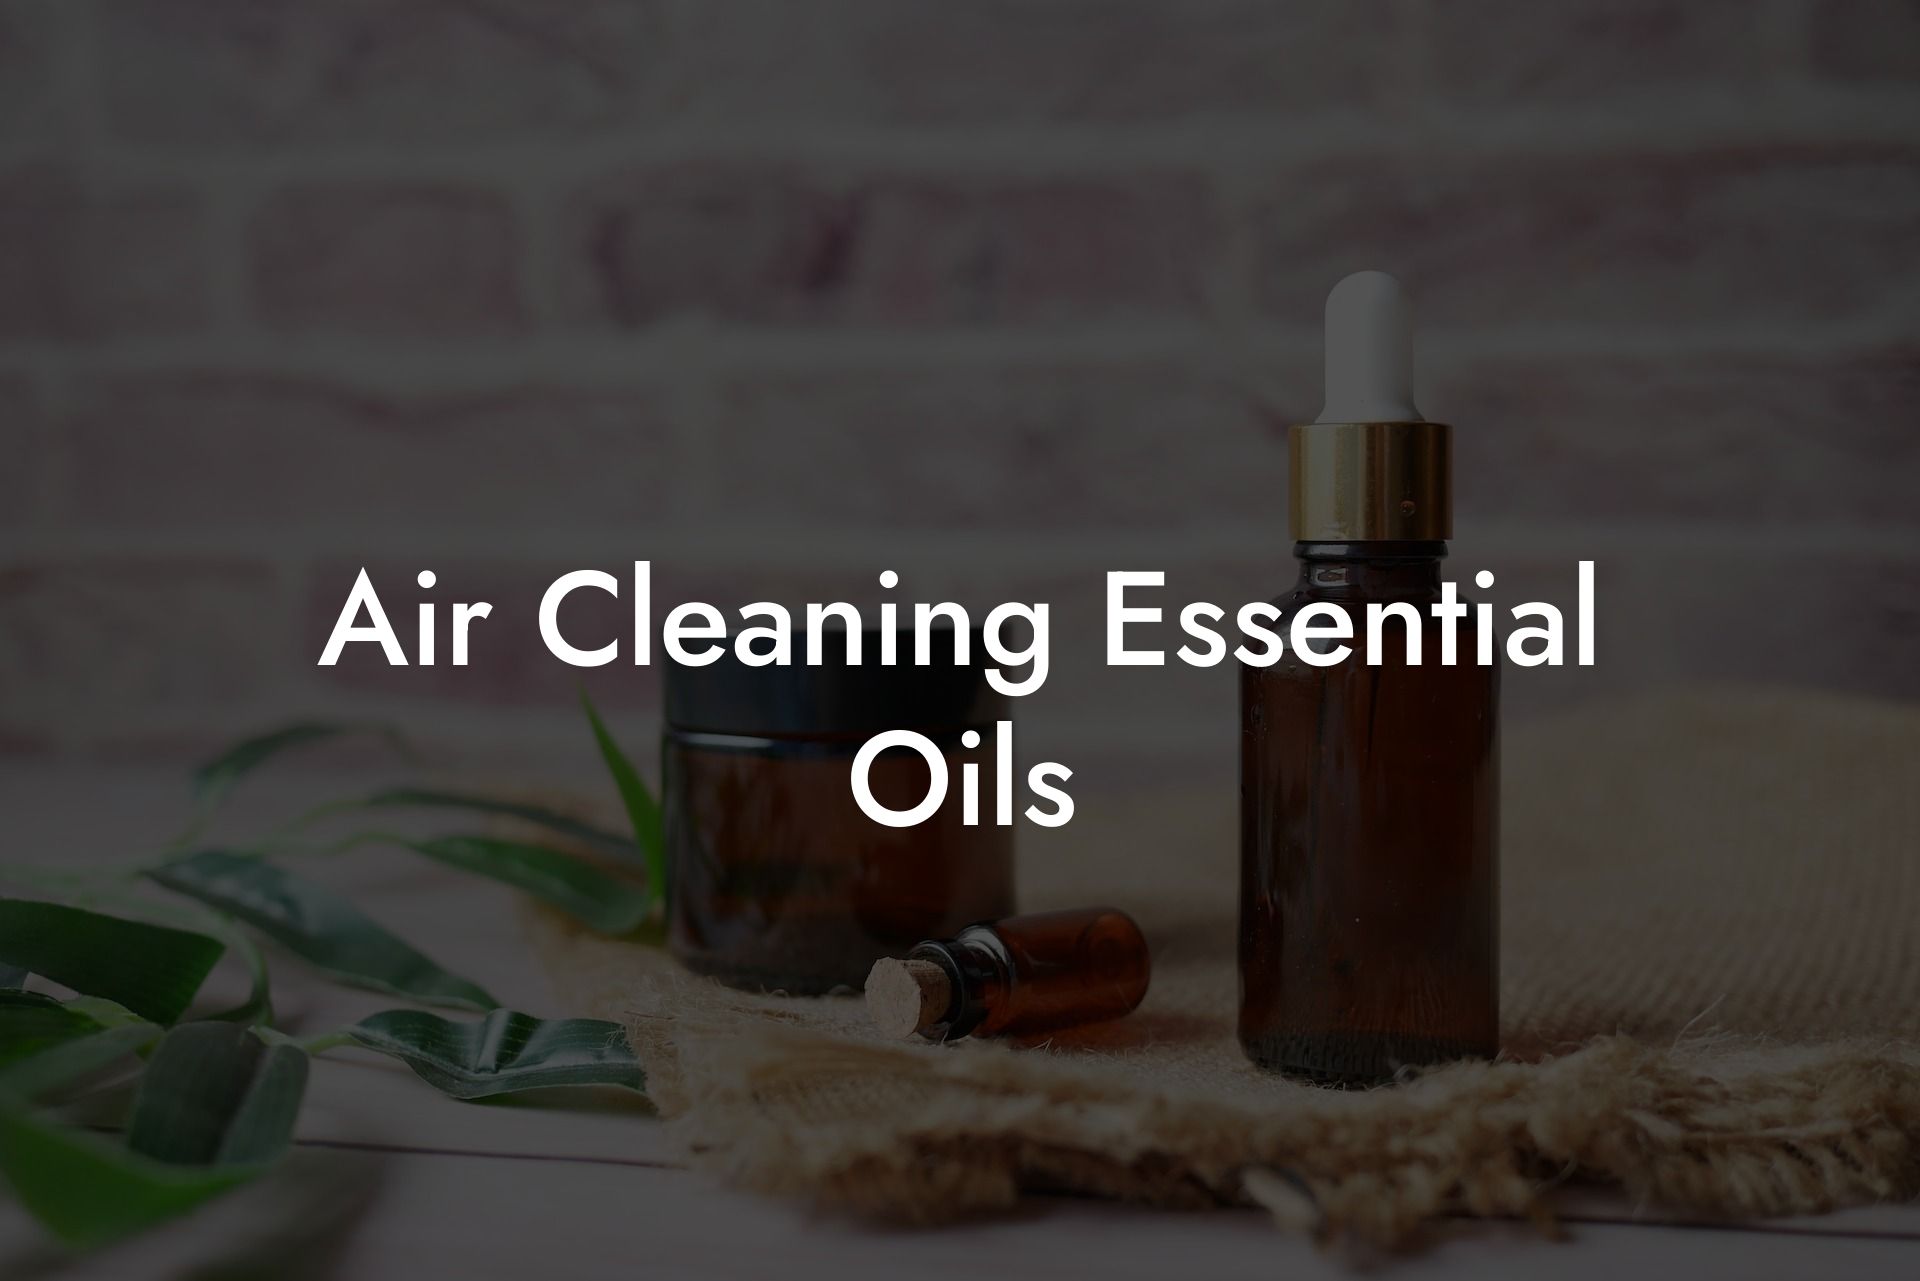 Air Cleaning Essential Oils